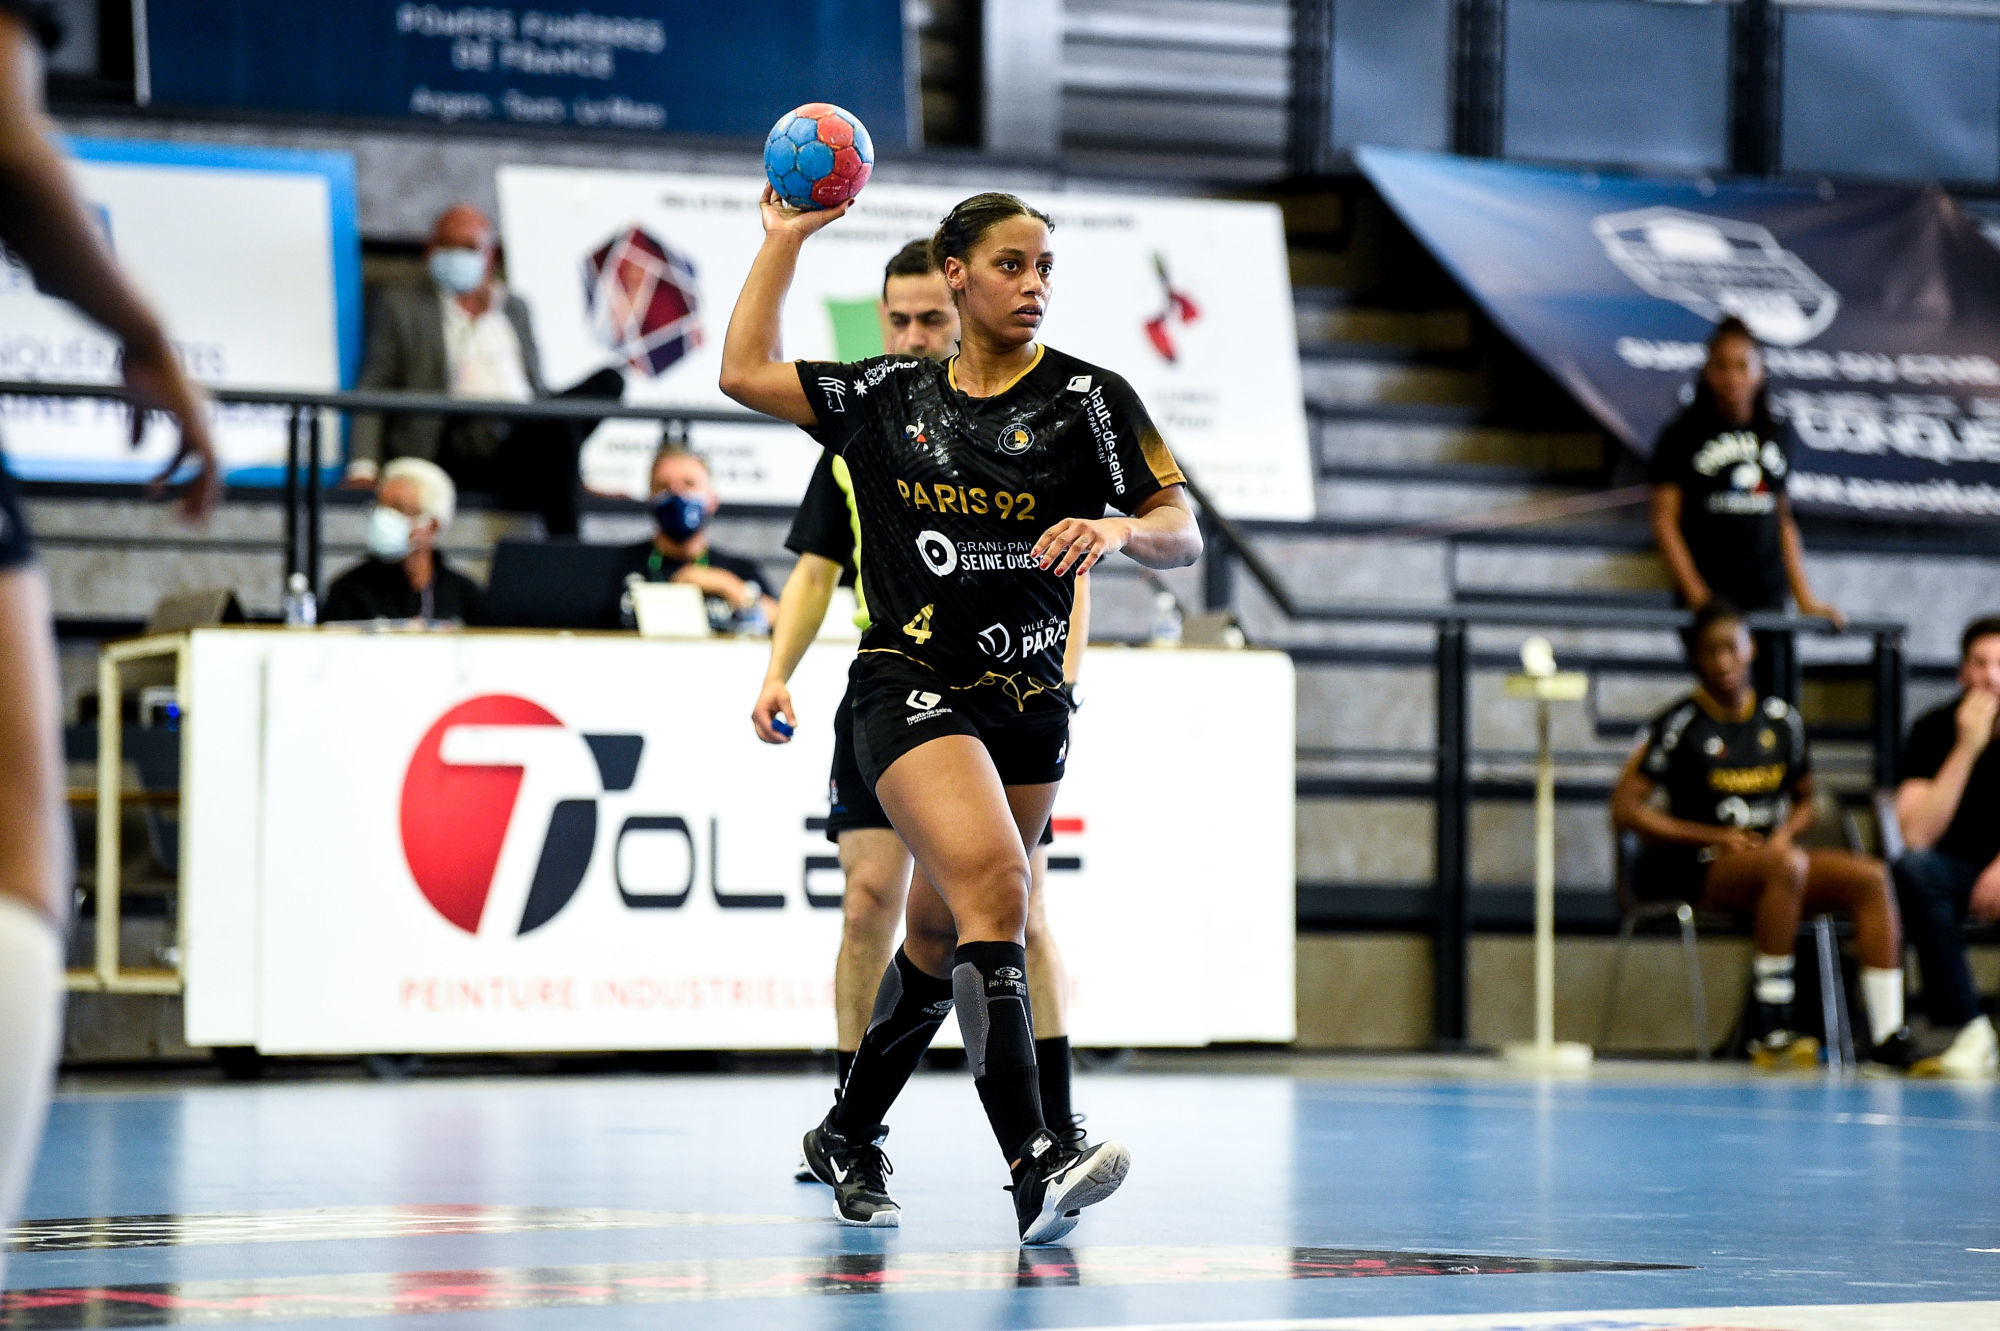 Soukeina SAGNA of Paris 92 during the Ligue Butagaz Energie match between Chambray and Paris 92 on May 8, 2021 in Chambray-les-Tours, France. (Photo by Hugo Pfeiffer/Icon Sport) - Soukeina SAGNA - Gymnase de la Fontaine Blanche - Chambray-les-Tours (France)